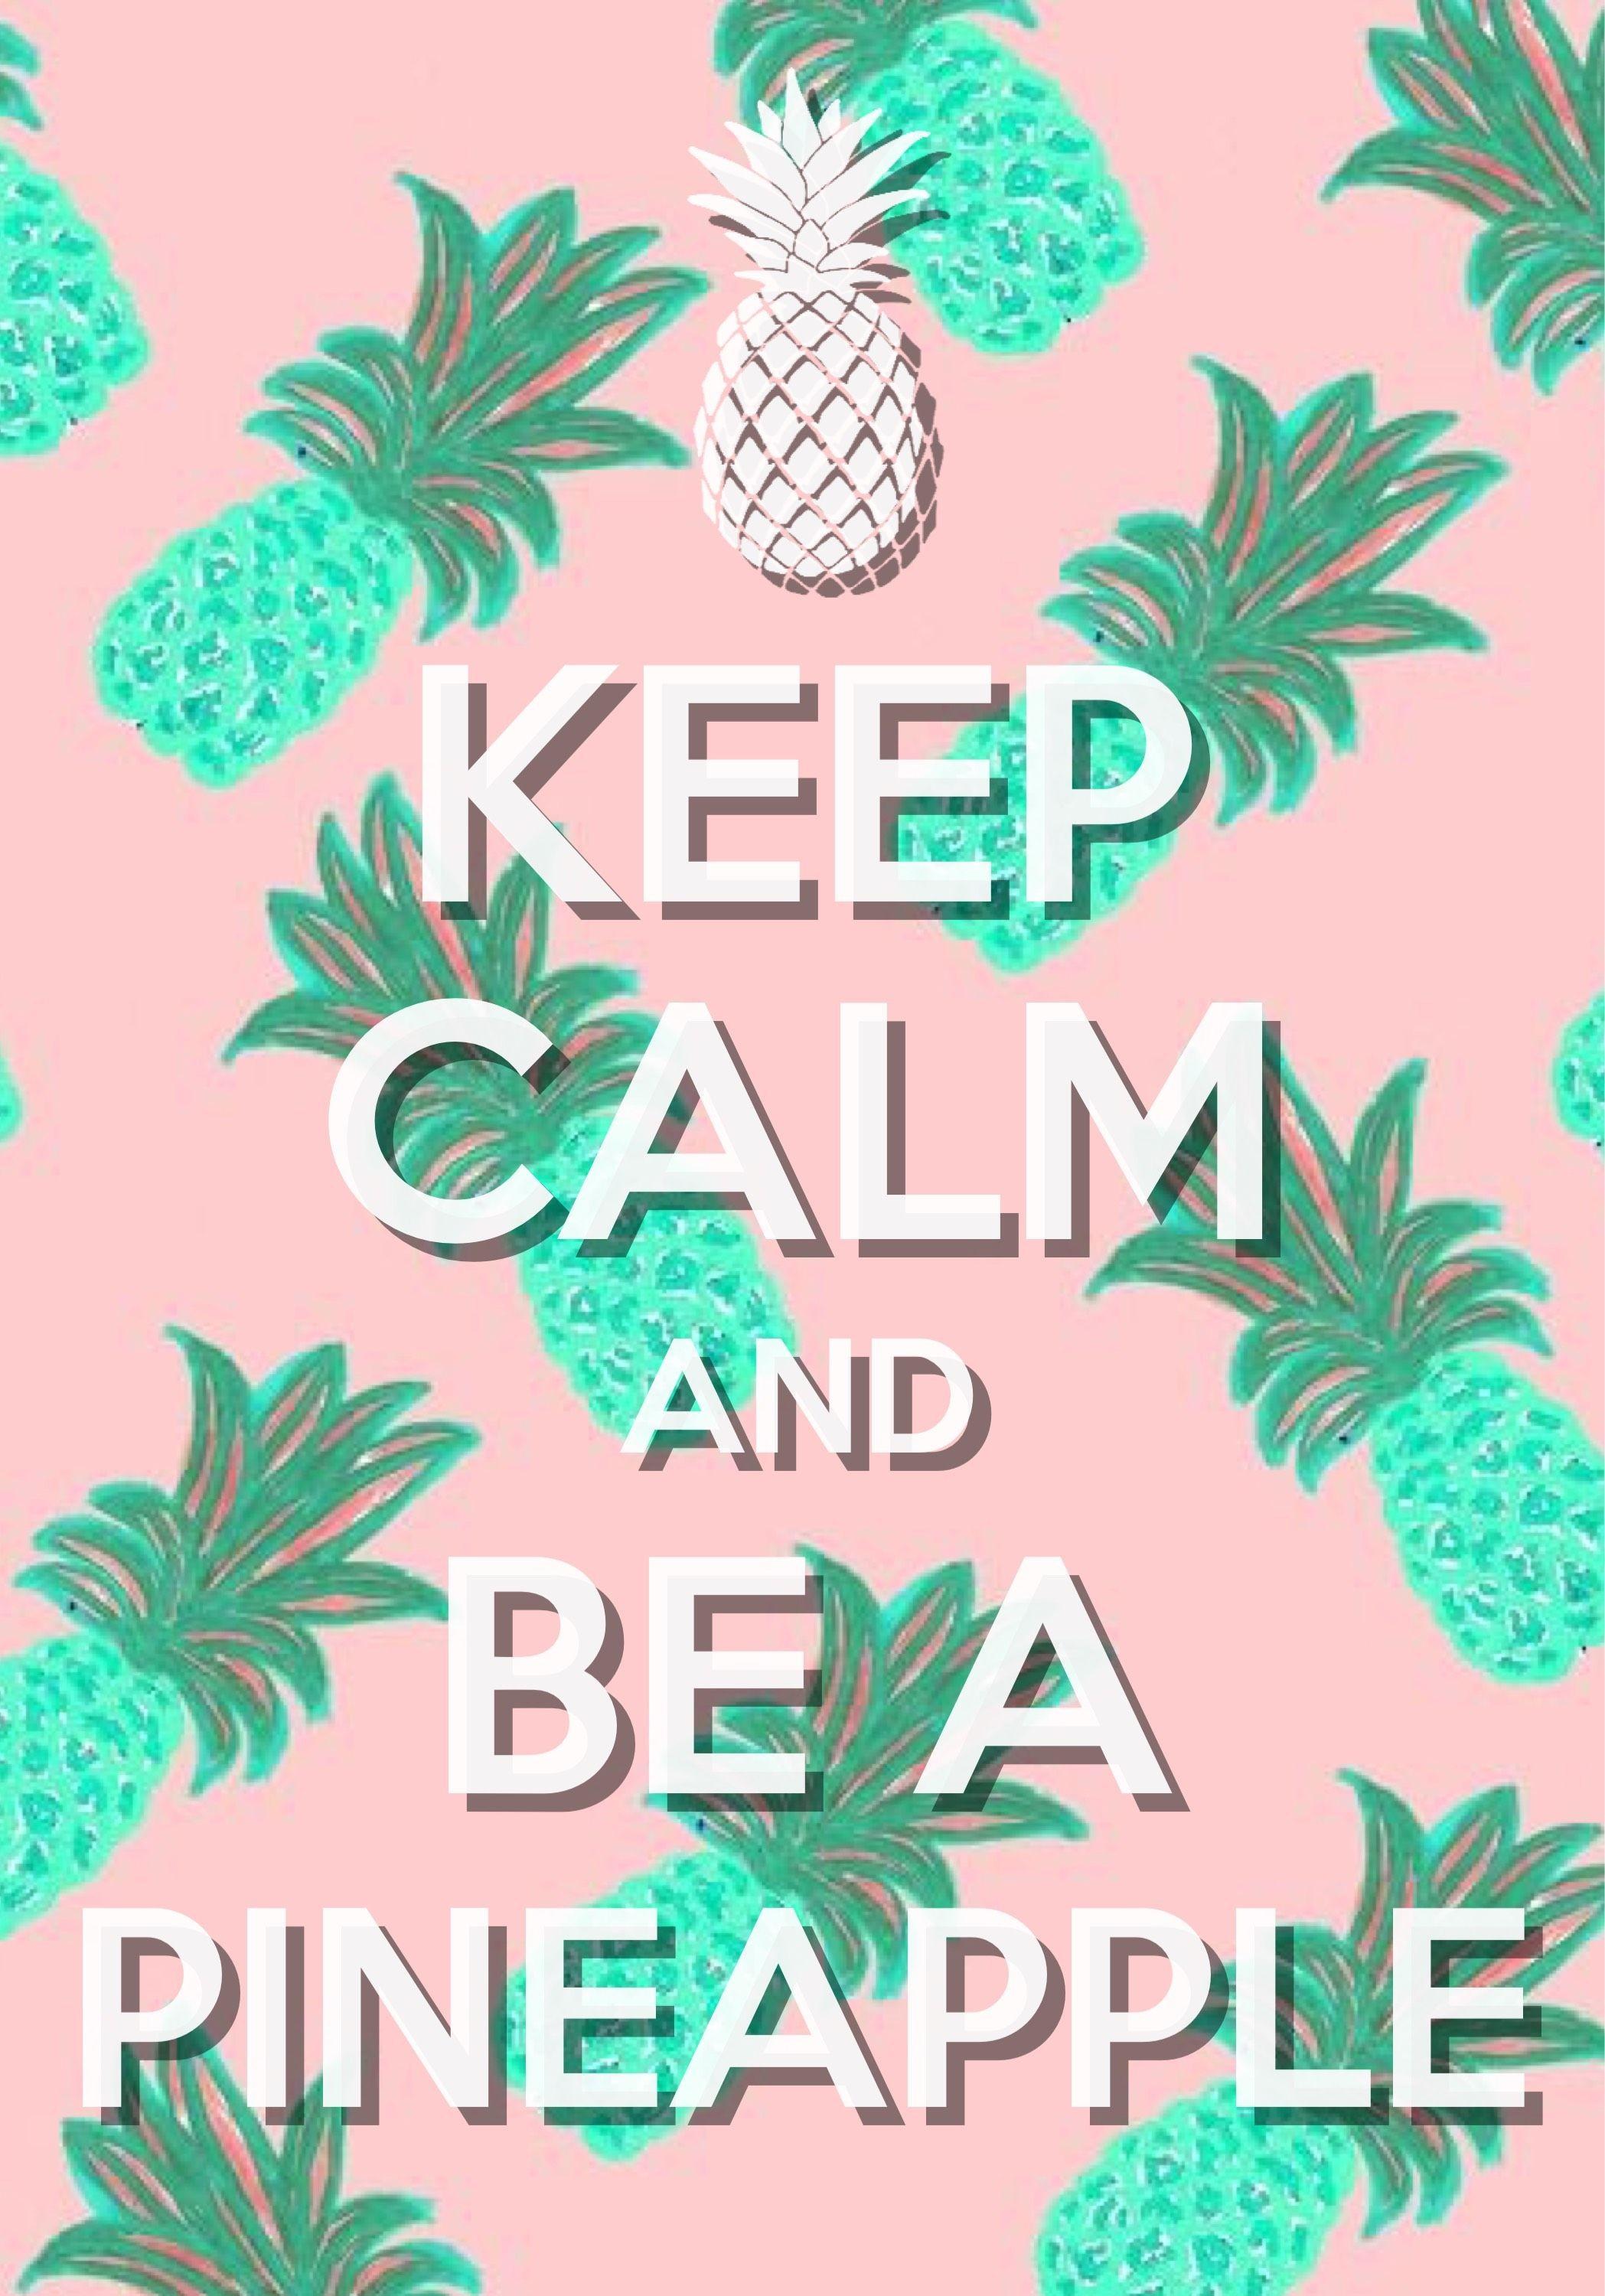 Pink Cute Pineapple Iphone Wallpapers